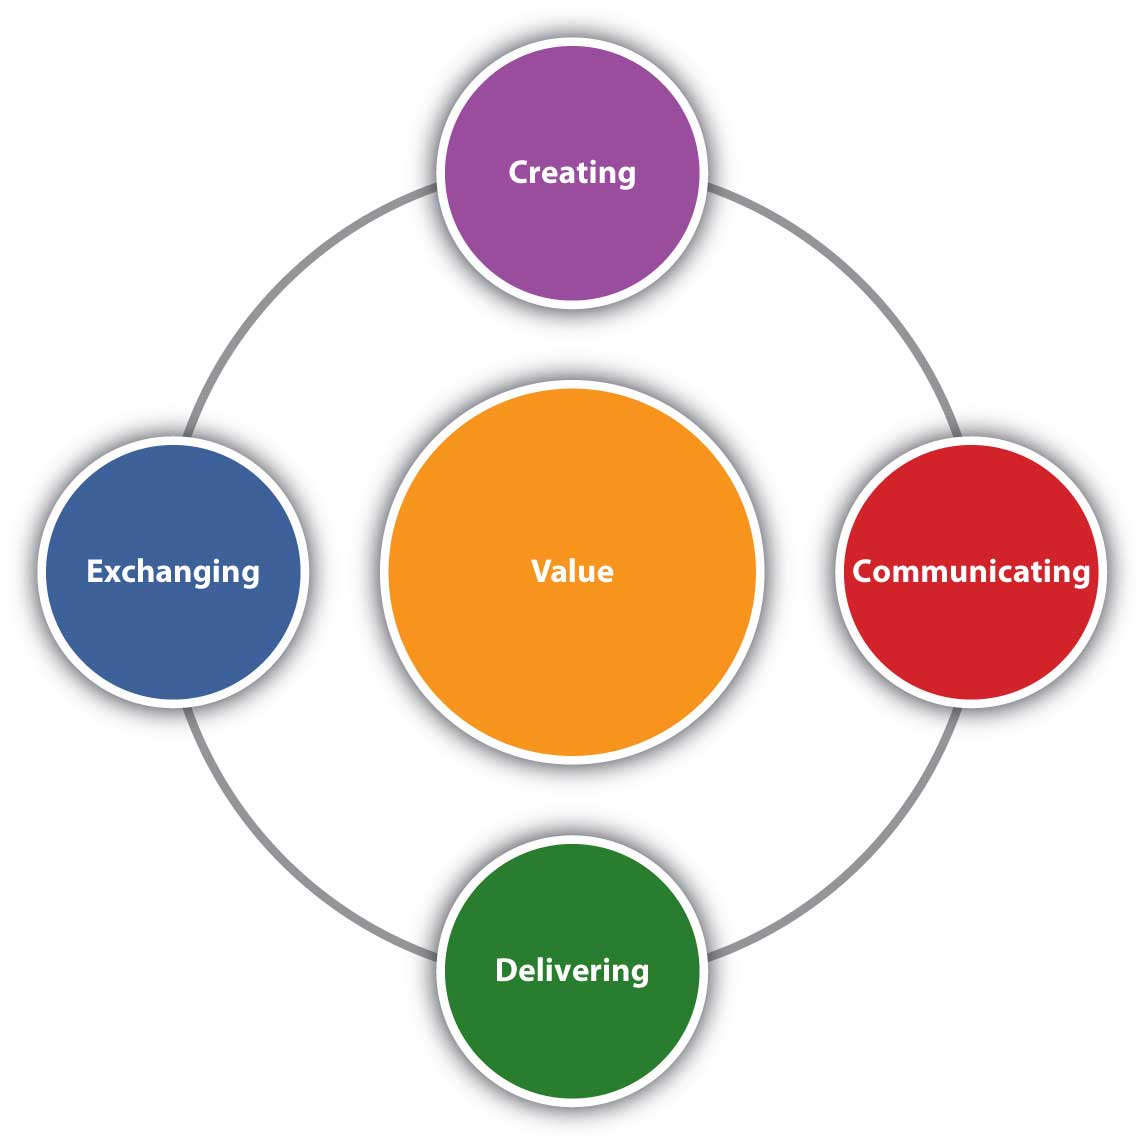 What are the 4 major components of marketing as defined by the American Marketing Association?